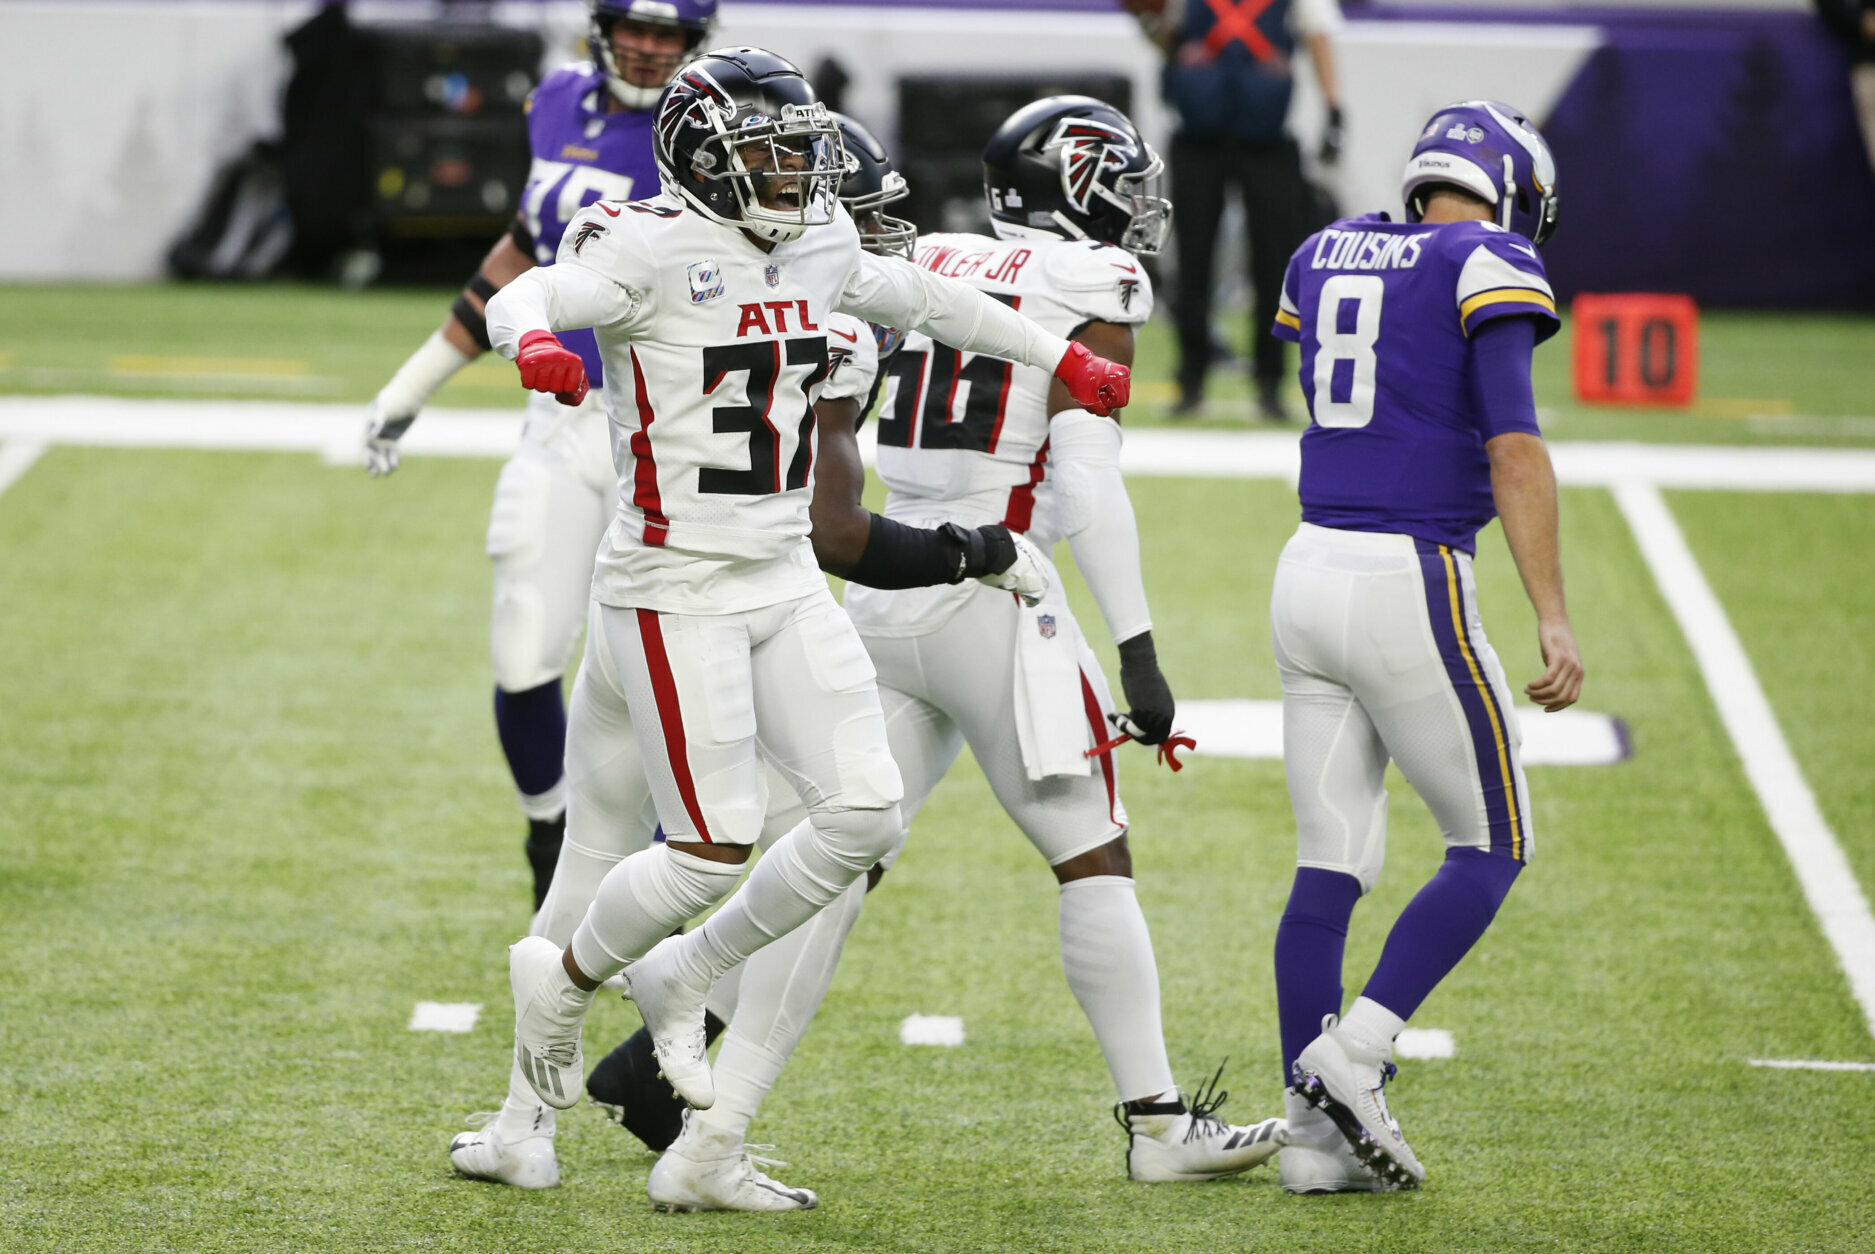 <p><b><i>Falcons 40</i></b><br />
<b><i>Vikings 23</i></b></p>
<p>Kirk Cousins, who had <a href="https://twitter.com/ESPNStatsInfo/status/1317898637163307010?s=20">the worst first half against one of the worst defenses in the league</a>, is playing so badly right now <a href="https://www.espn.com/nfl/story/_/id/30143169/finish-season-interceptions-continue">even he knows he should be benched</a>. I&#8217;m not sure how Mike Zimmer comes back for 2021 if the Vikings don&#8217;t have a massive turnaround starting immediately.</p>
